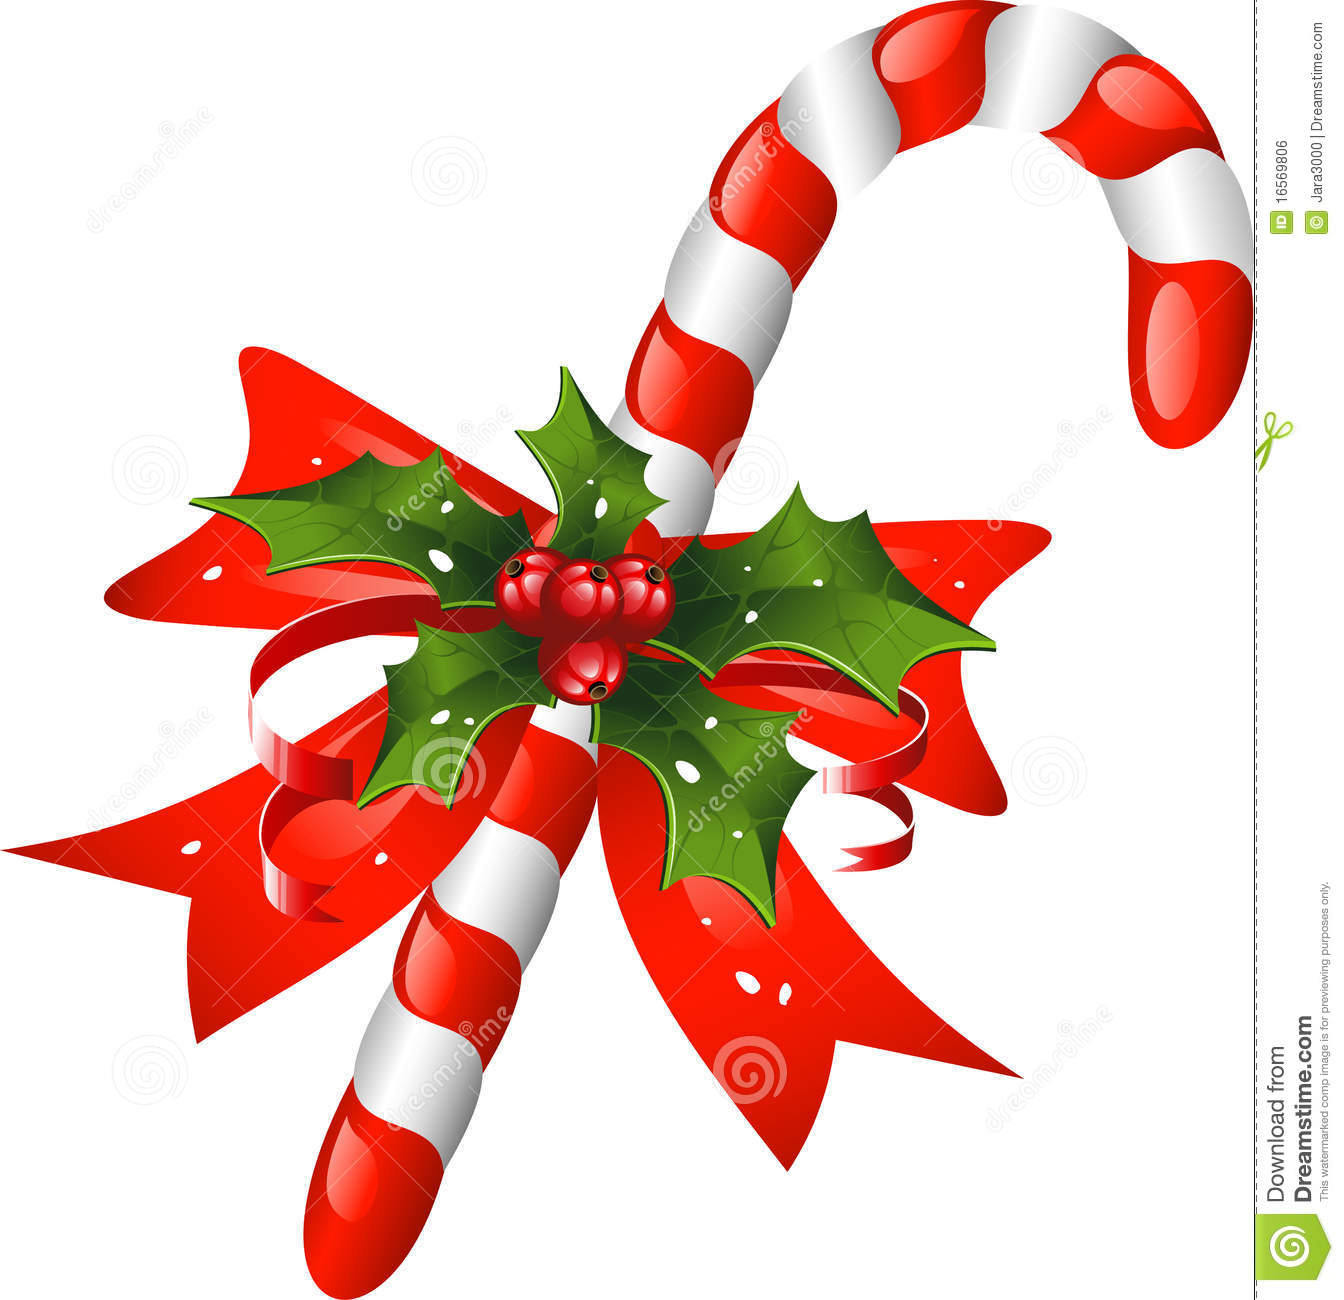 Christmas Candy Image
 Christmas Candy Cane Decorated With A Bow And Holl Stock